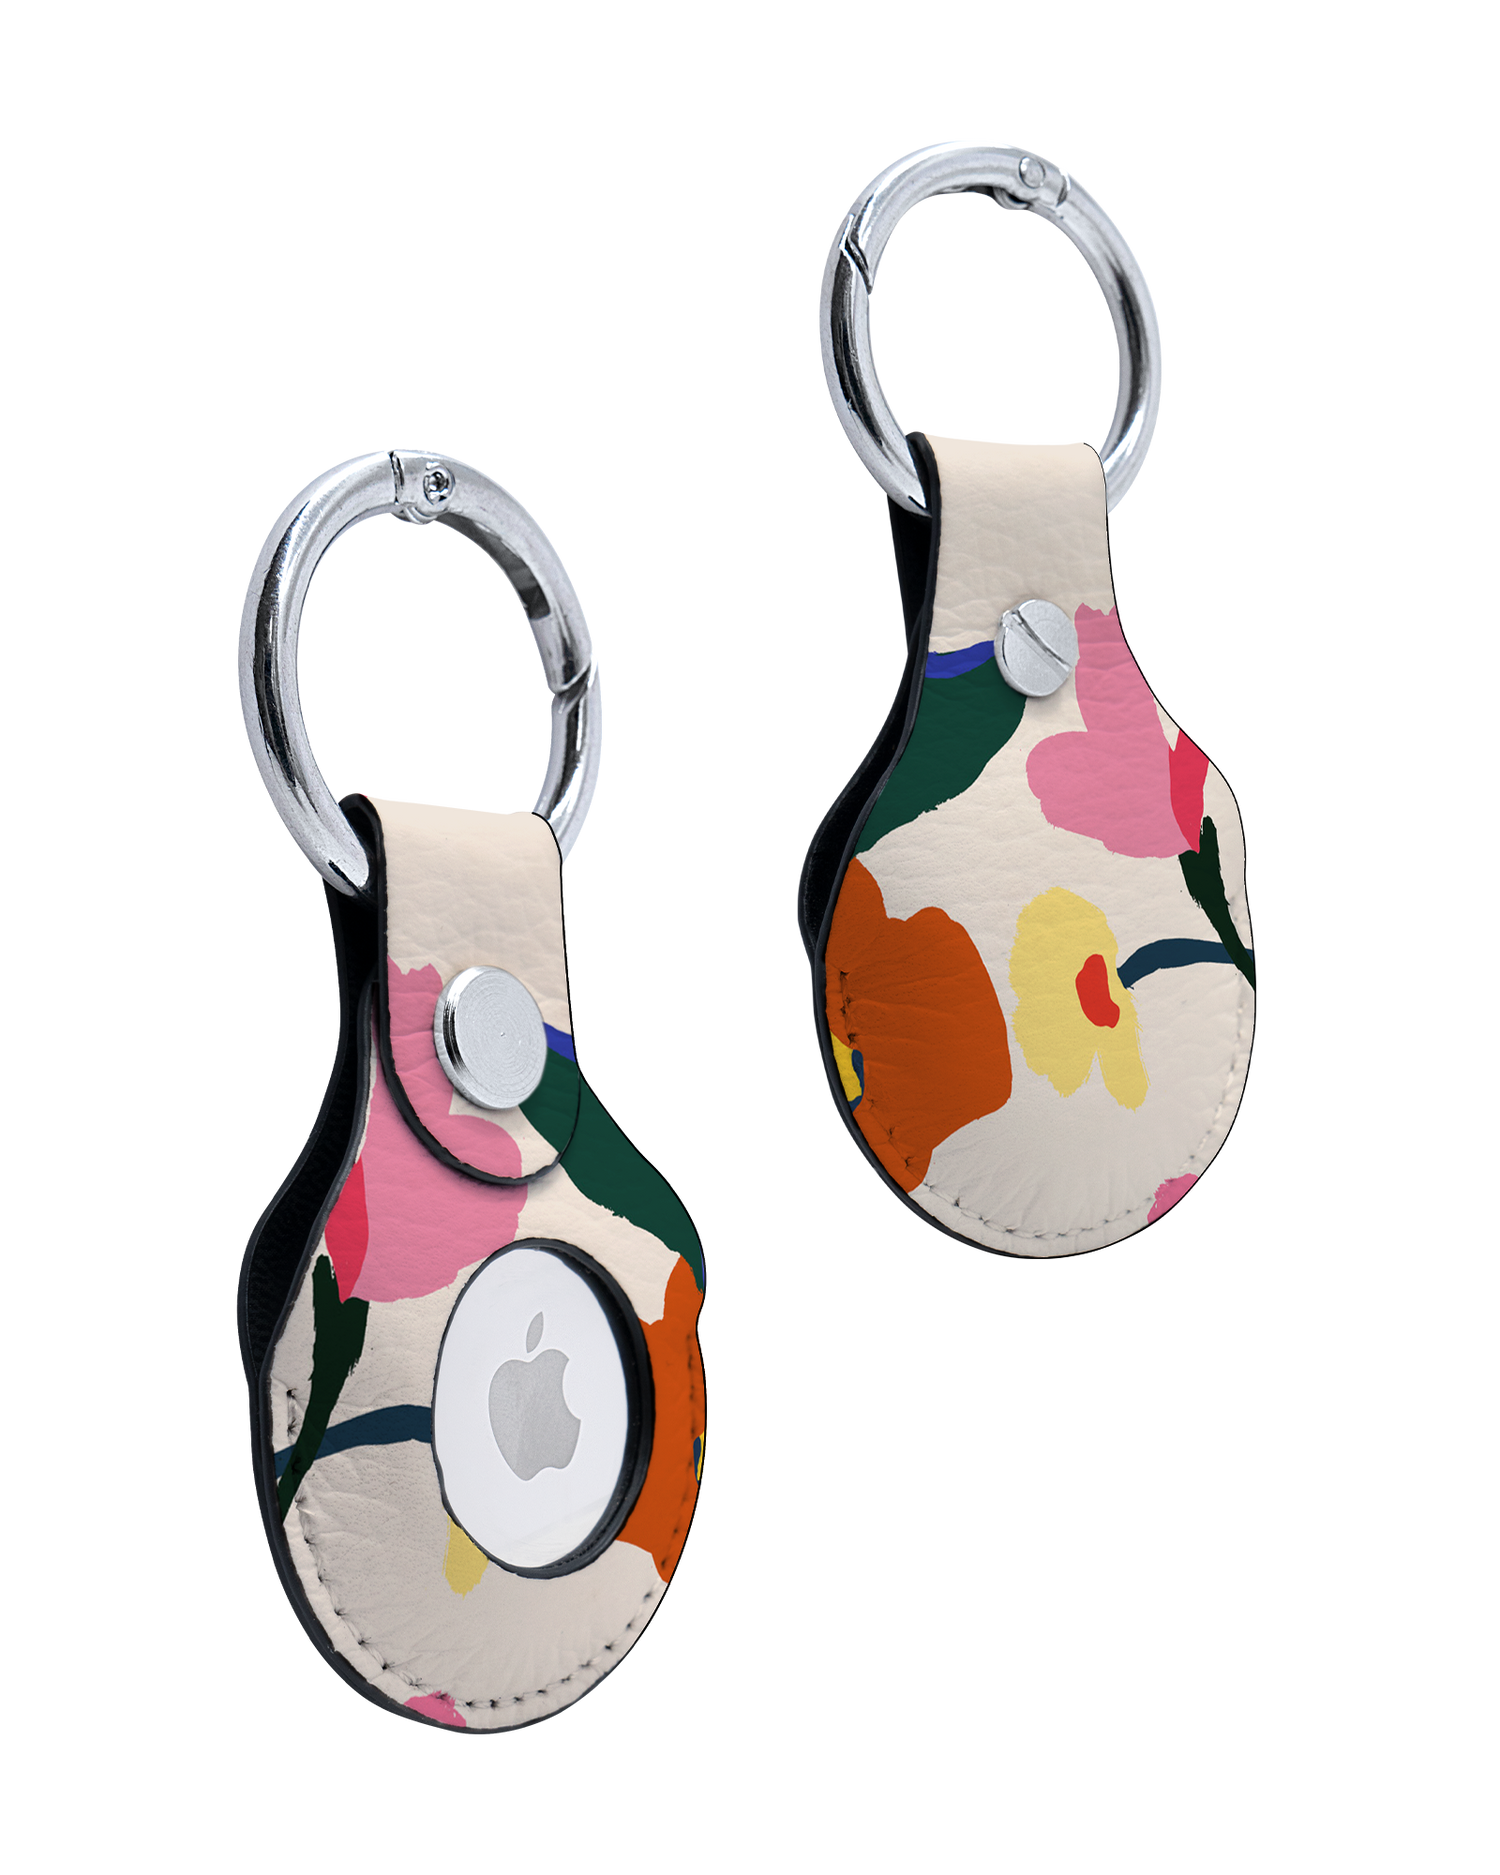 AirTag Holder with Handpainted Blooms Design: Front and Back